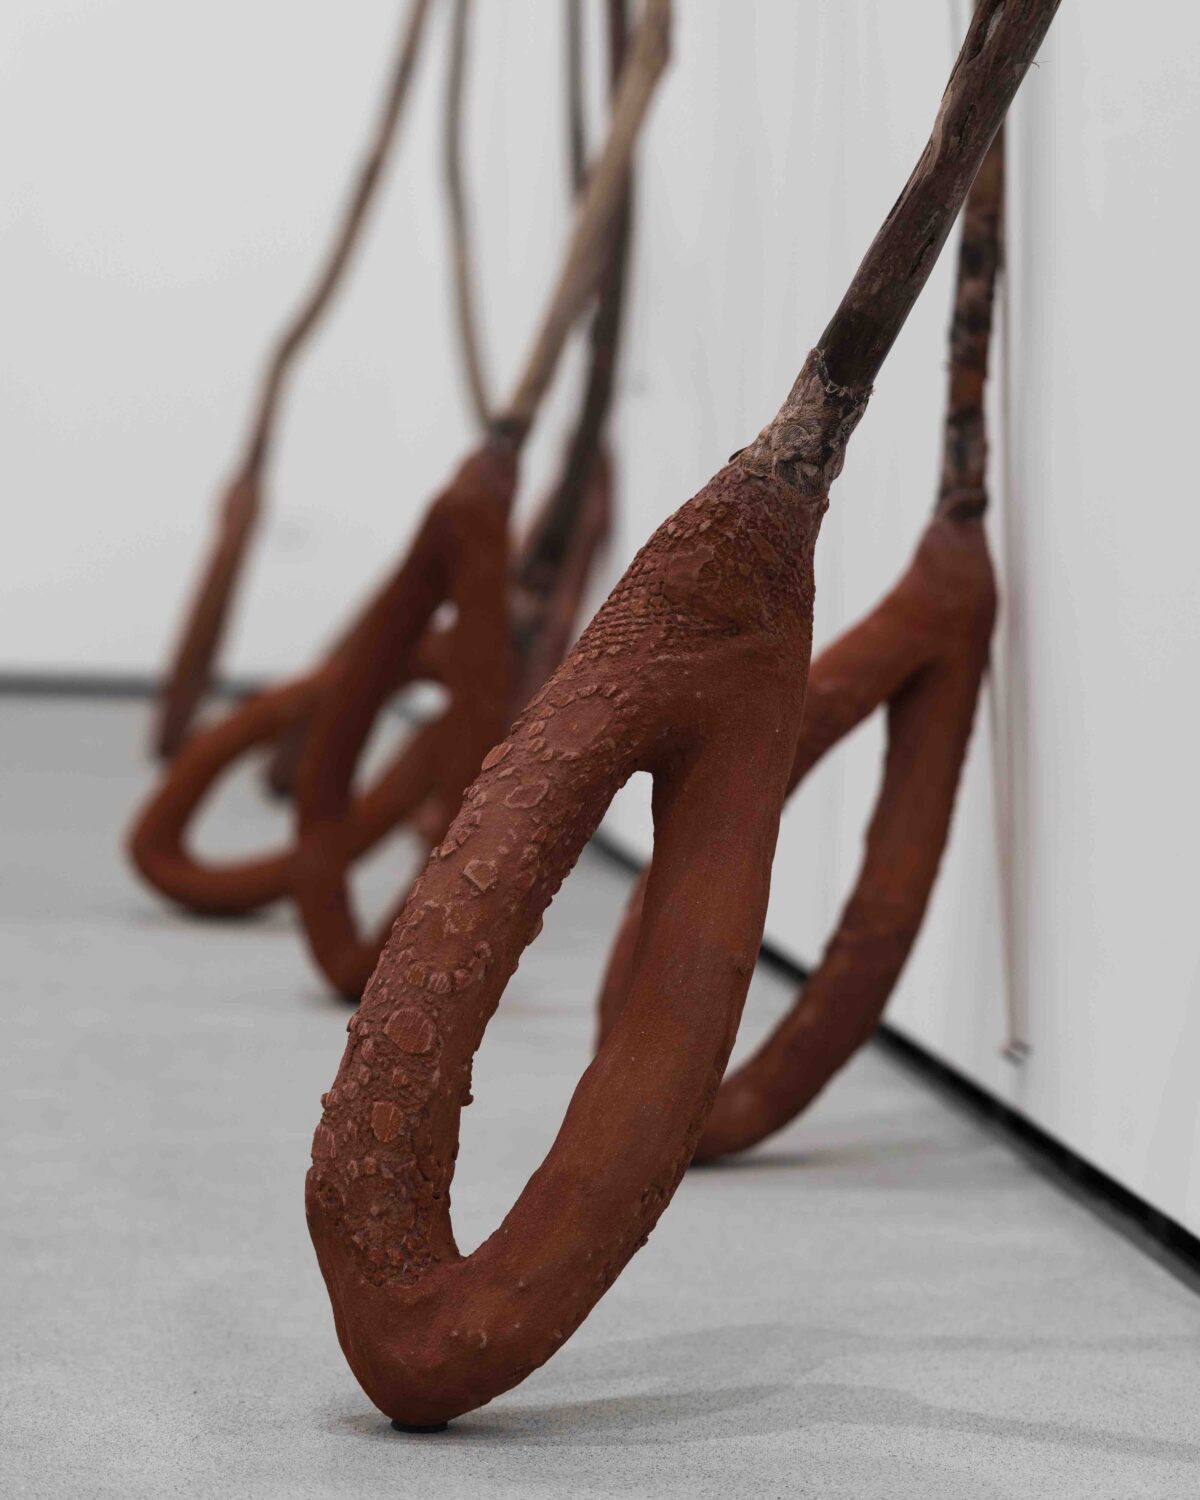 Close up of enlarged slingshot sculpture focusing on the end of the slingshot, which resembles a needle eye